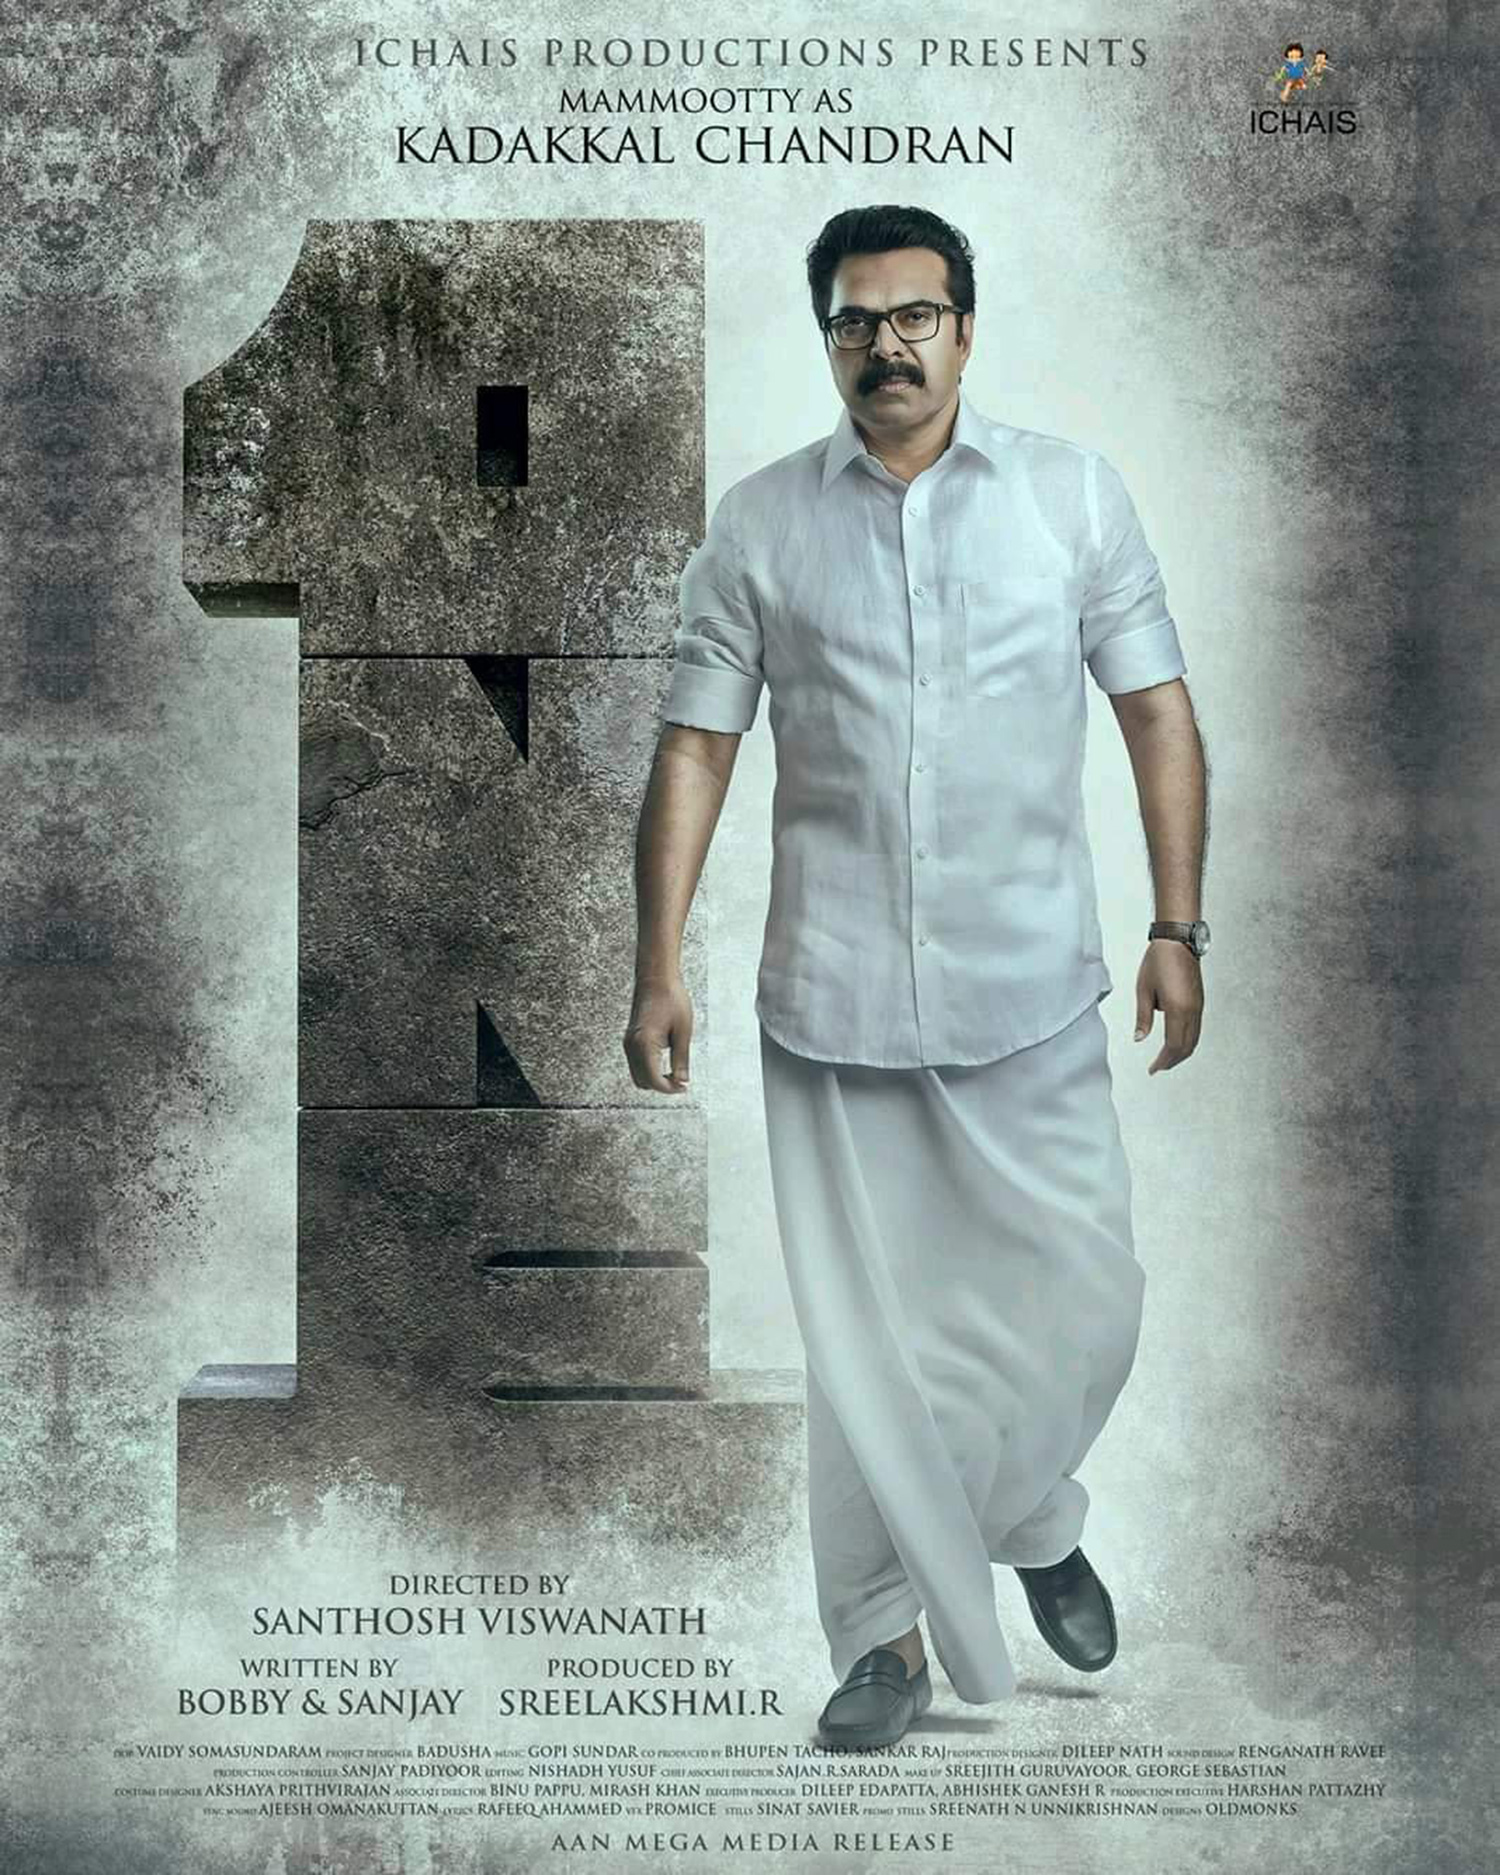 Mammootty looks charismatic as ever in this new poster of One!